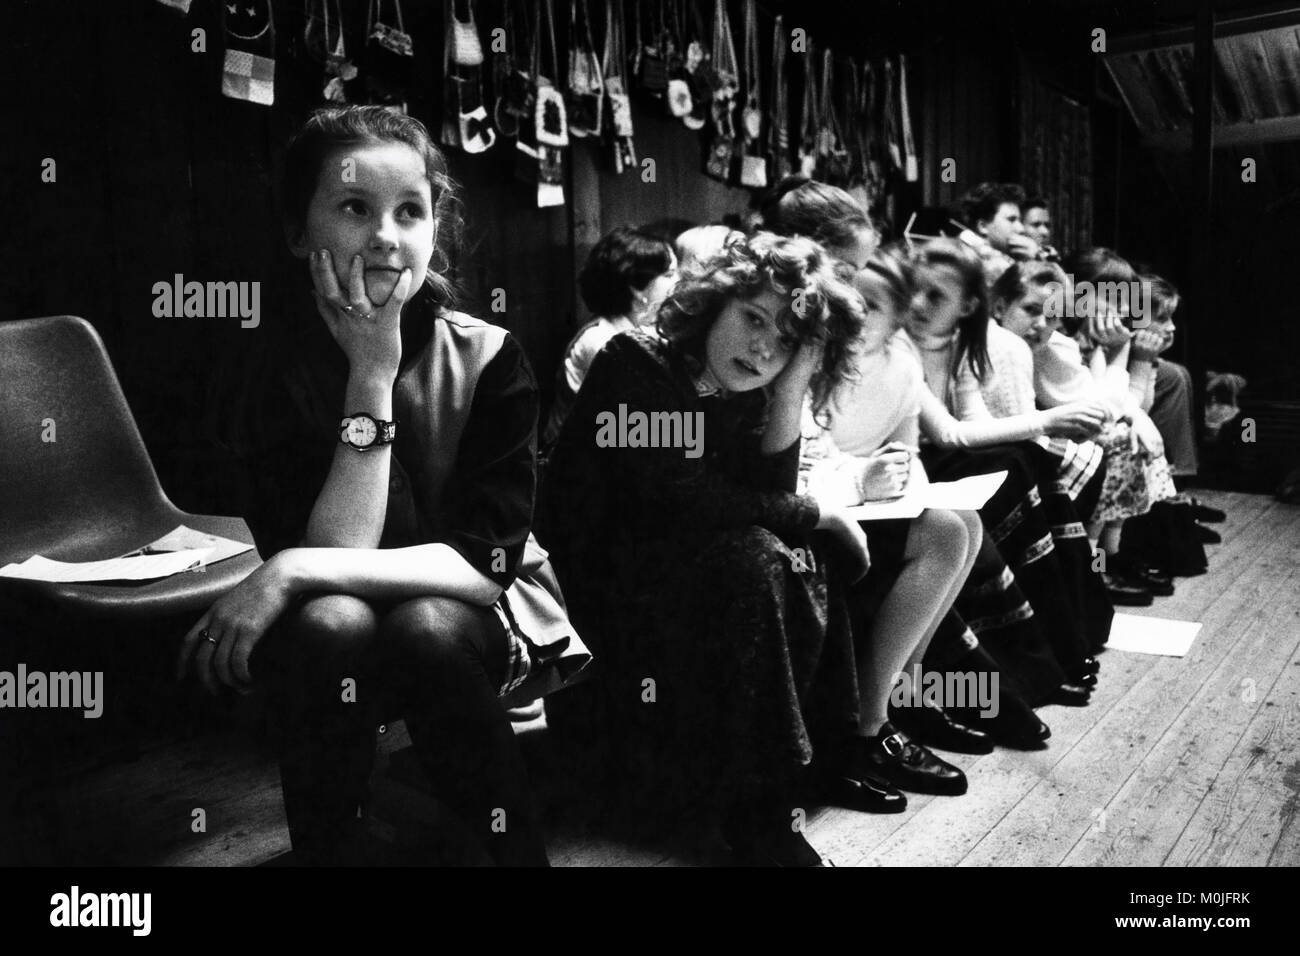 Young girls wait to perform on stage at village hall small eisteddfod Llangynidr Powys Wales UK Stock Photo